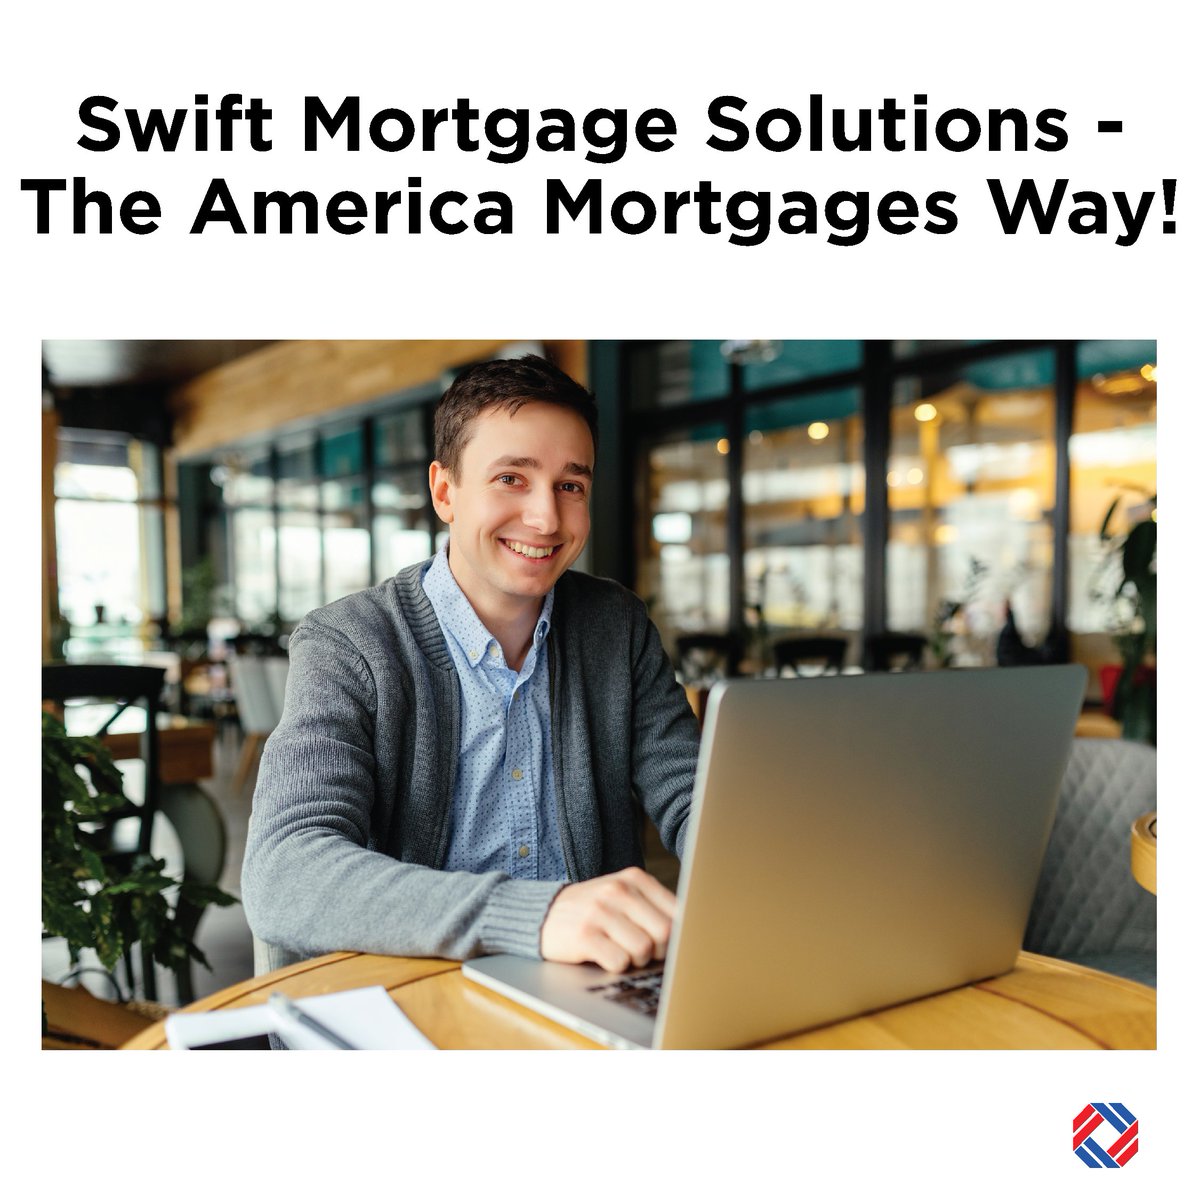 Swift Mortgage Solutions - The America Mortgages Way!

hello@americamortgages.com | americamortgages.com

#SwiftMortgages #AmericaMortgages #MortgageSolutions #FastApprovals #RealEstateDreams #MortgageExperts #US